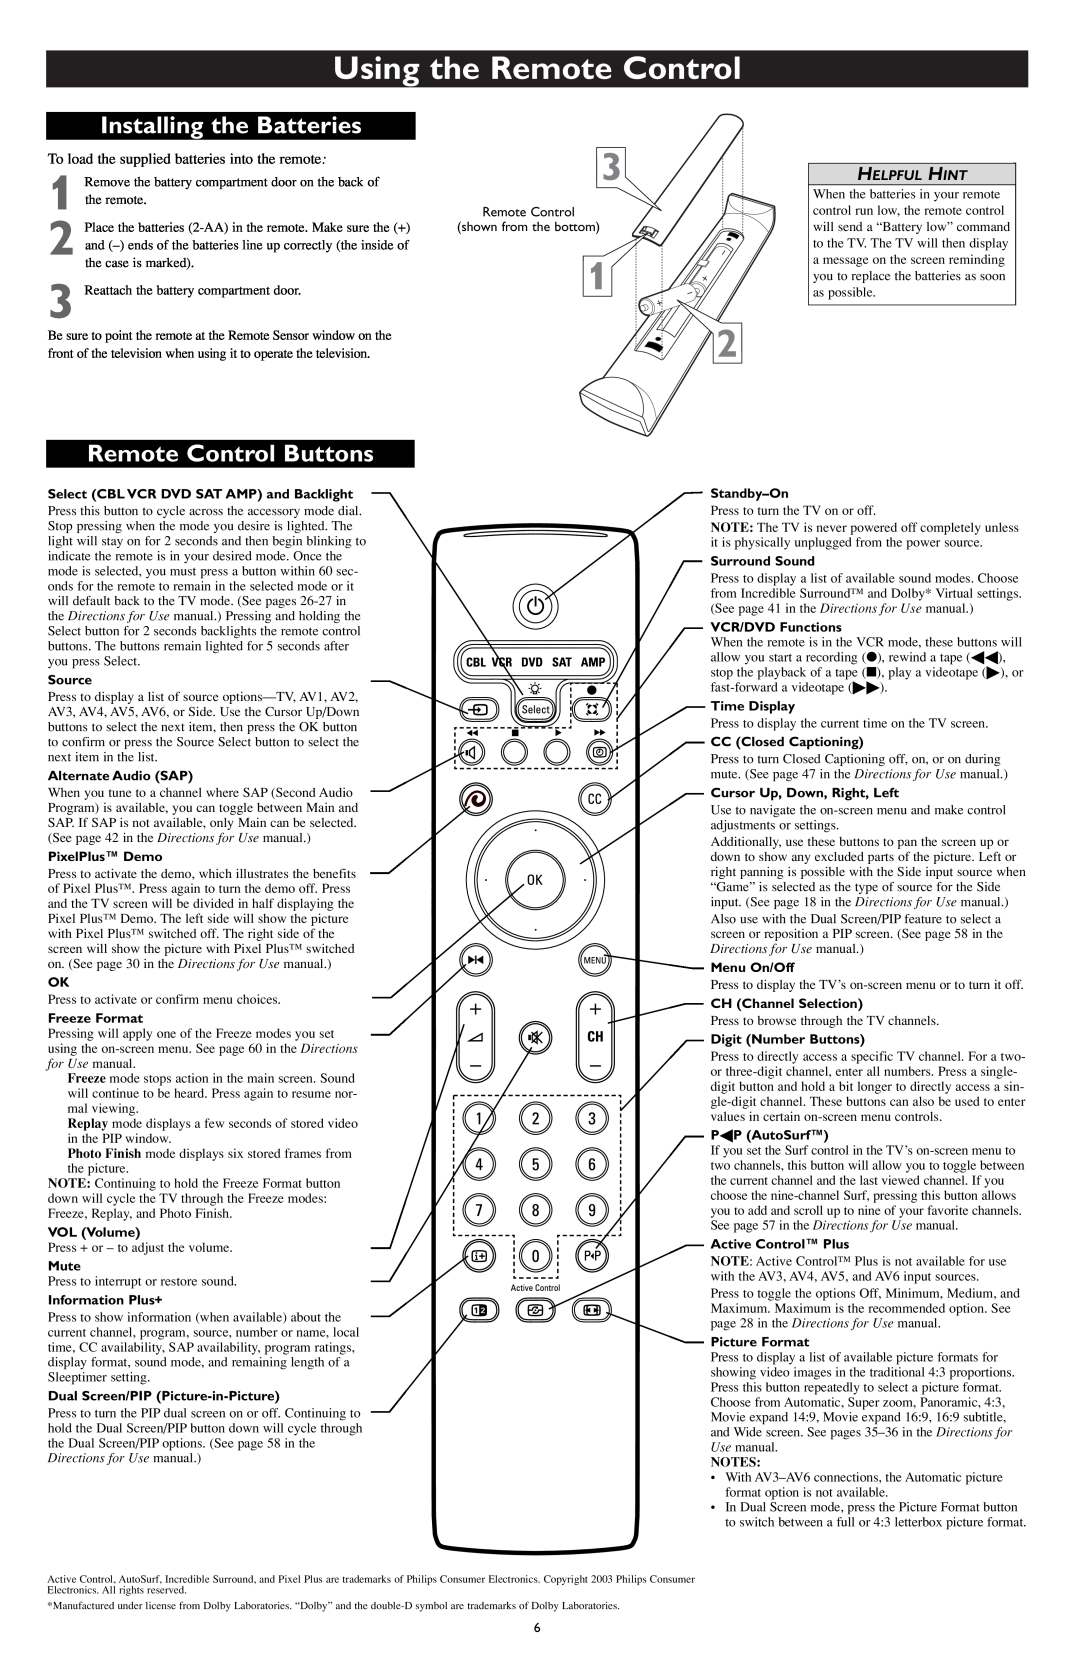 Philips CD-D11U, CD-D13, CD-D17HD Using the Remote Control, Installing the Batteries, Remote Control Buttons, Helpful Hint 